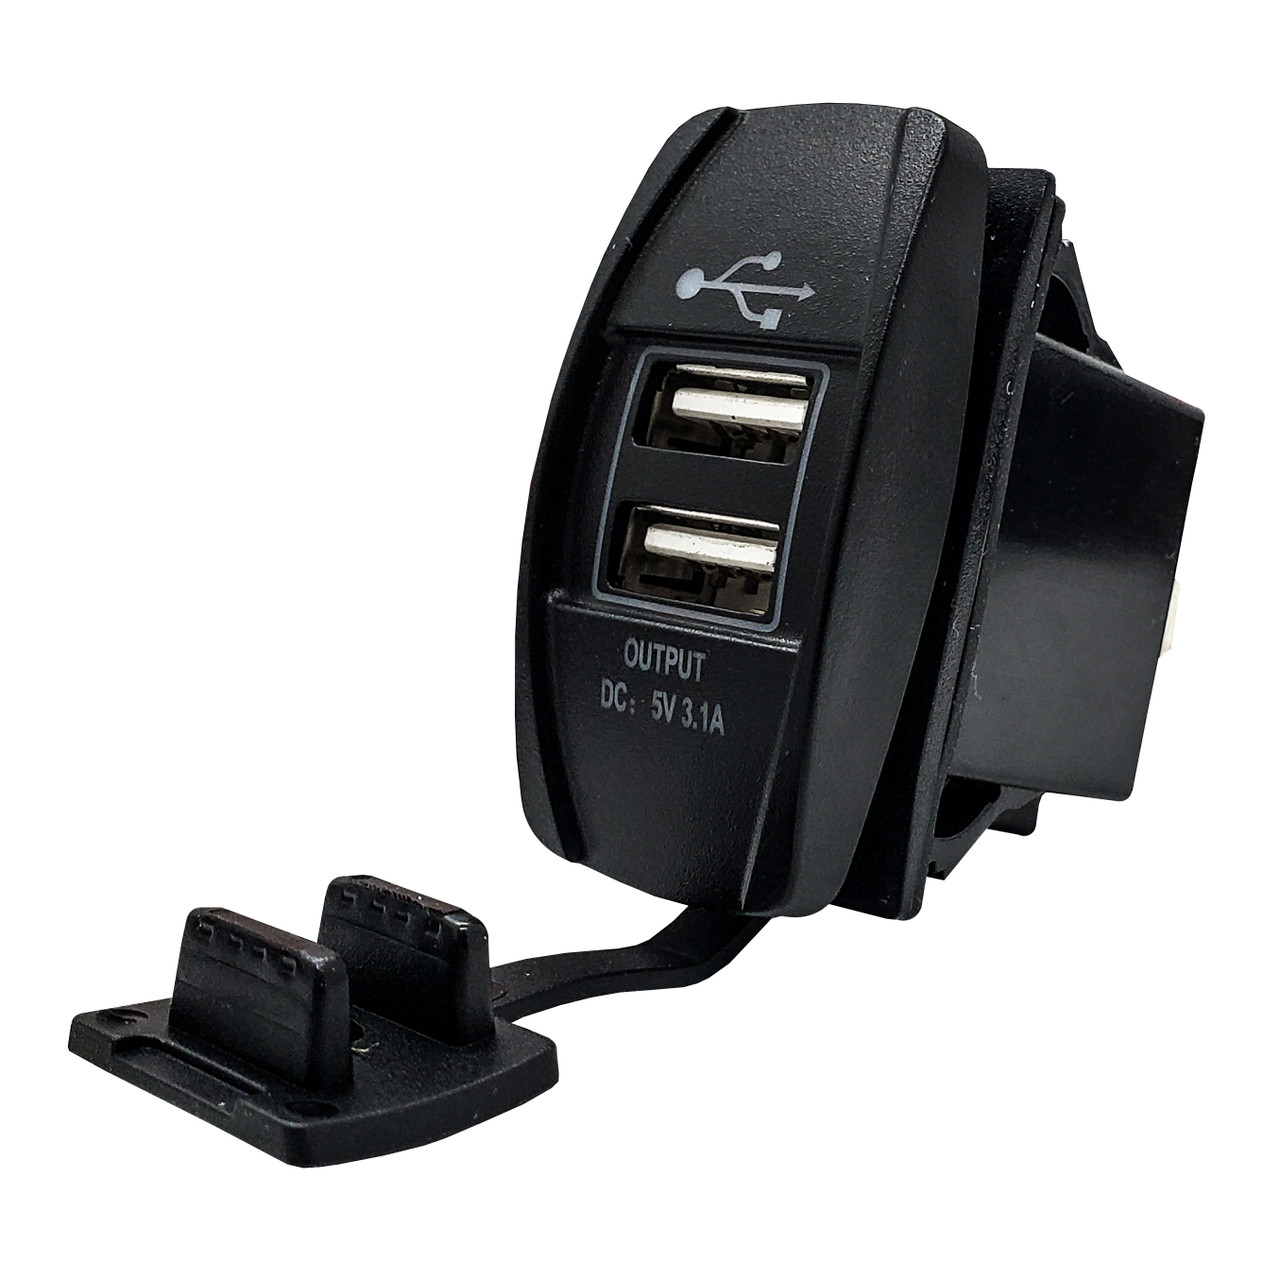 Twin USB Panel Mount Outlet 5V 3.1A